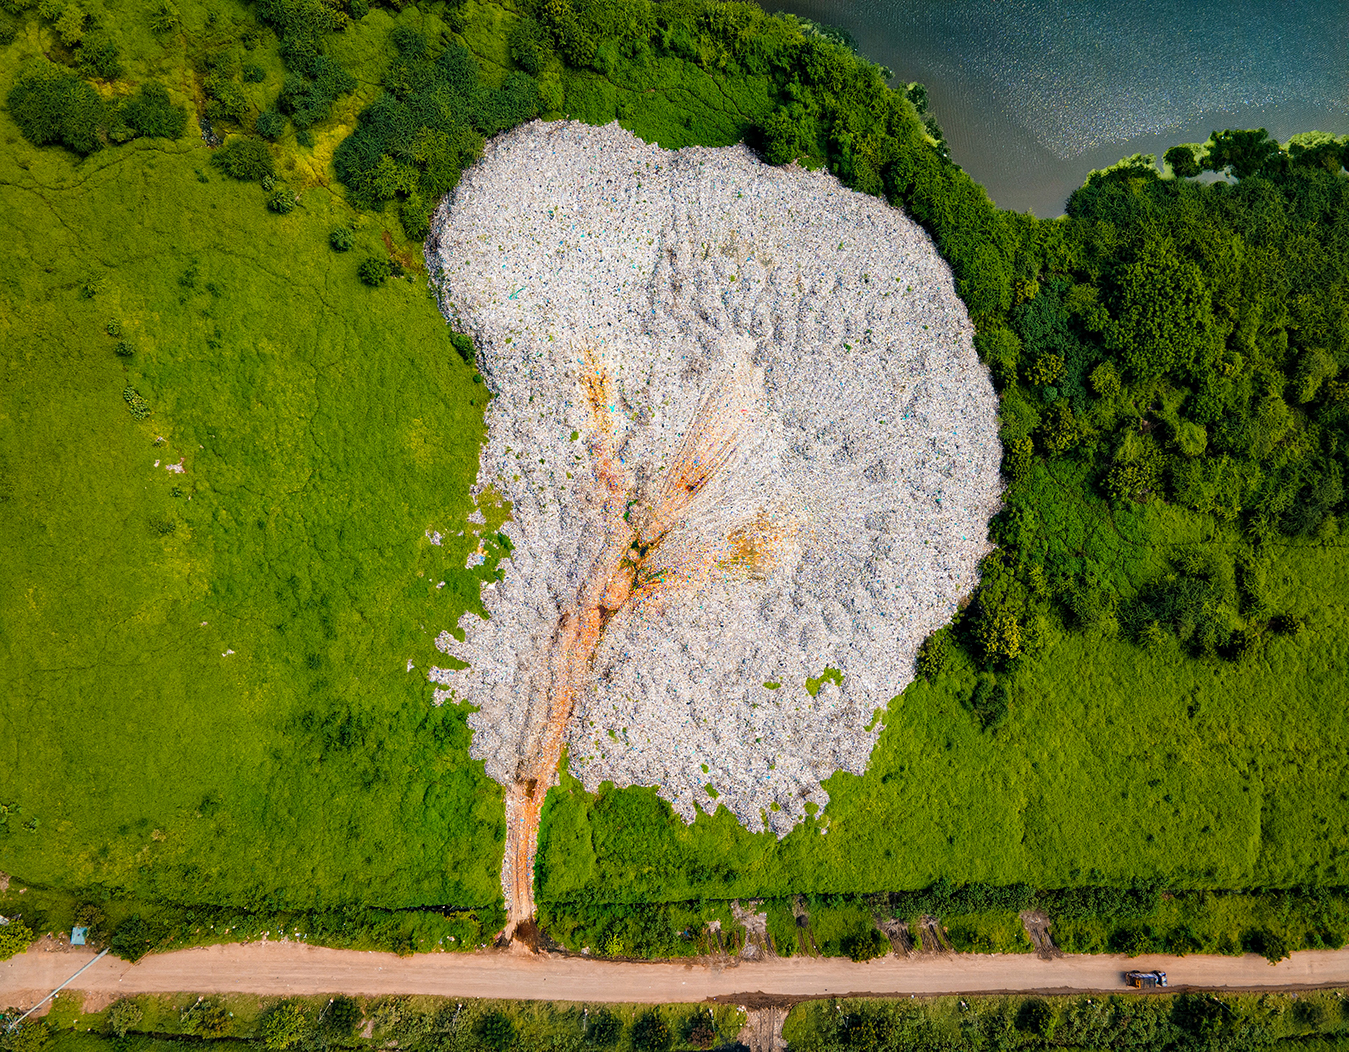 SkyPixel 6th Anniversary Contest Nominated Entries -Boon to Bane! - The 300 acres of dump yard